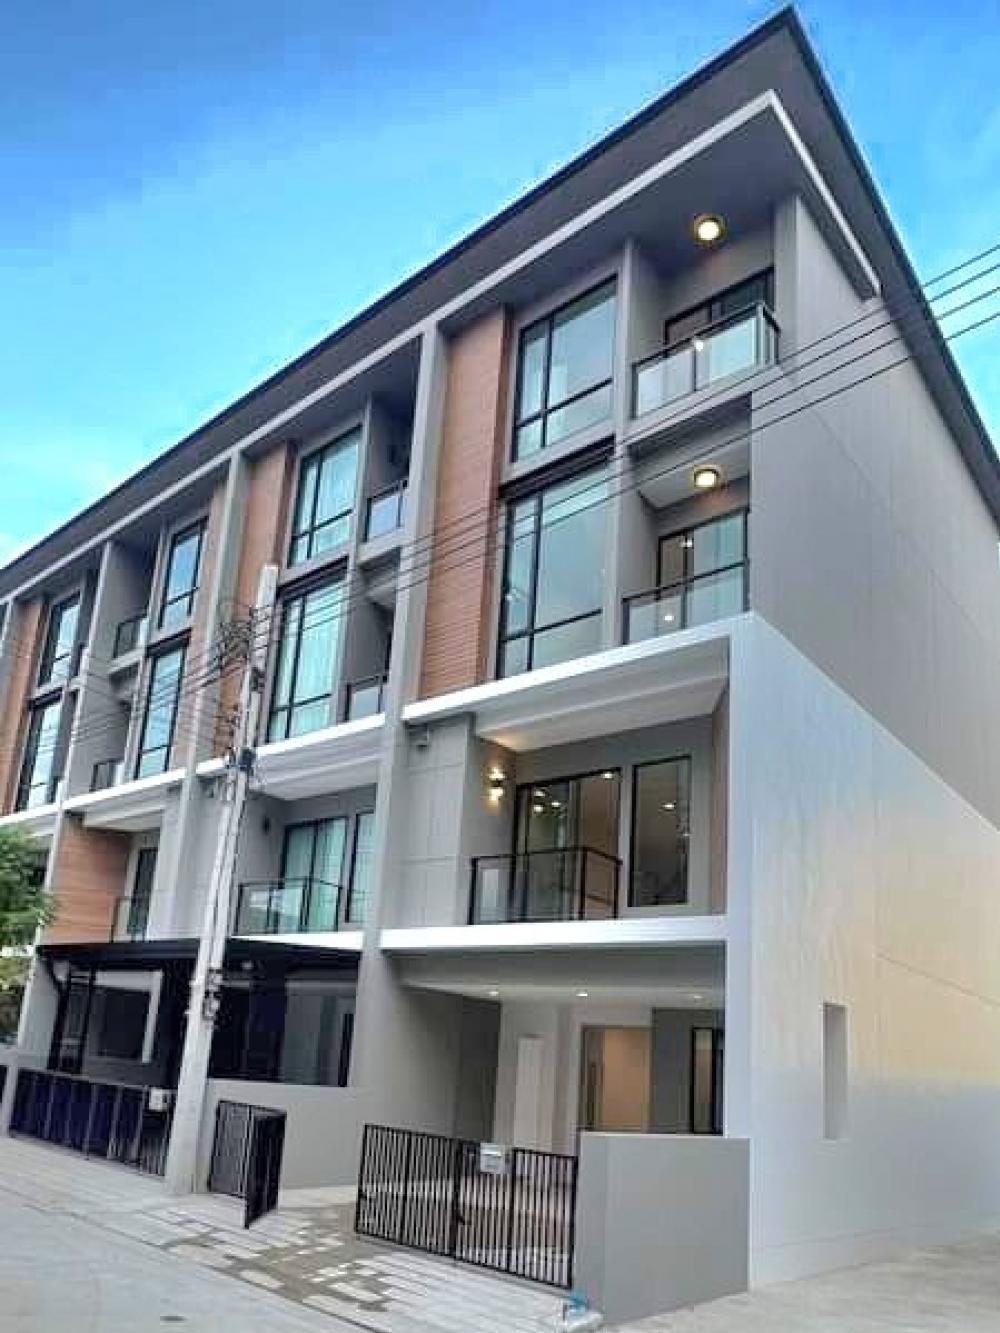 For RentTownhouseNawamin, Ramindra : Townhome Premium Place Phaholyothin-Ramintra ♦️ near Central Ramintra, welcome to take a look 😊🙏 ( Add Line : @bbcondo88 ) Property Code 879-B1890